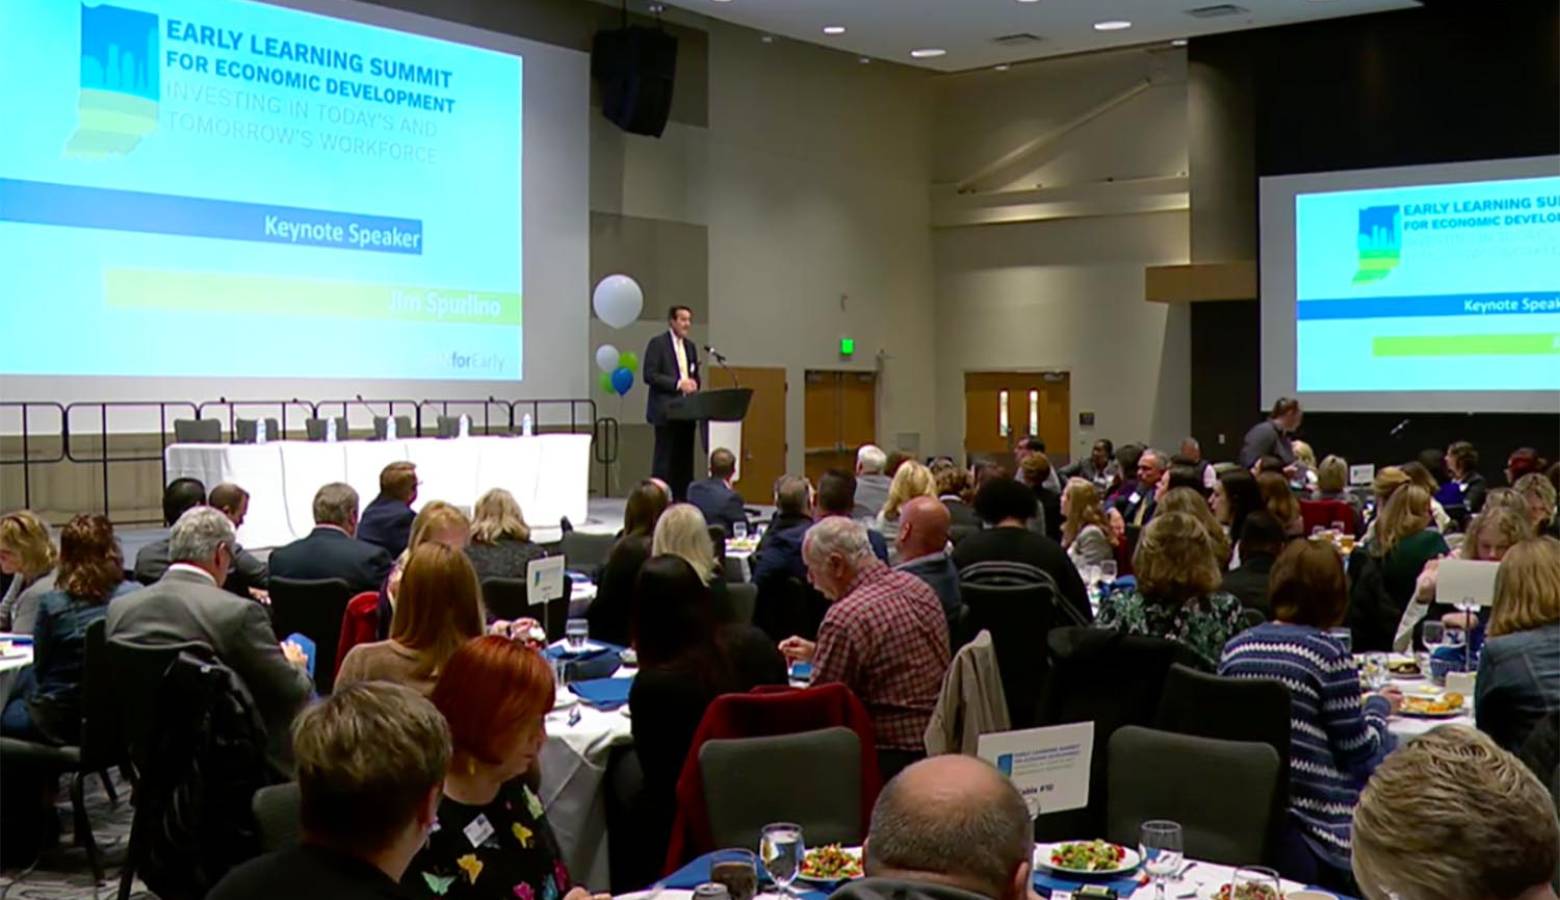 The Indiana Early Learning Summit brought together business leaders to discuss workforce issues related to childcare. (Courtesy of Indiana Early Learning Summit)